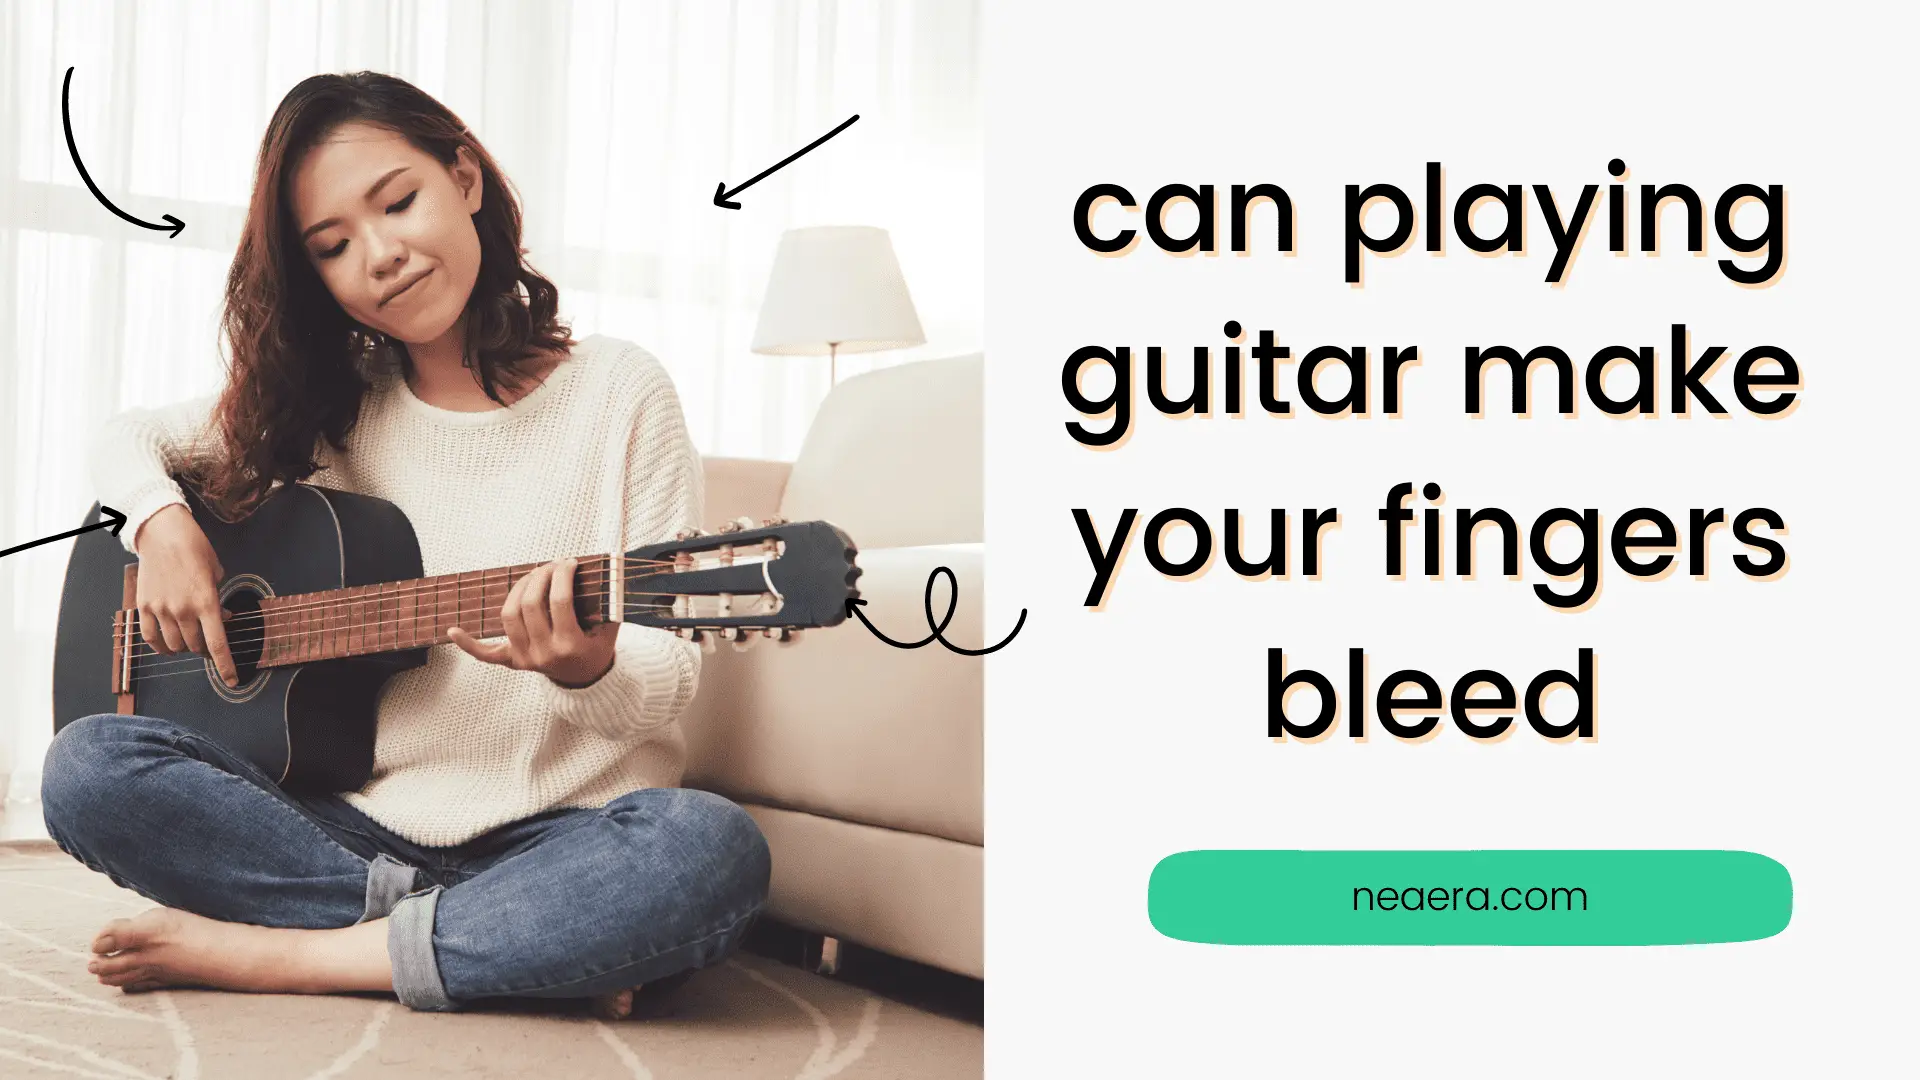 Can playing guitar make your fingers bleed? Avoid pain & damage